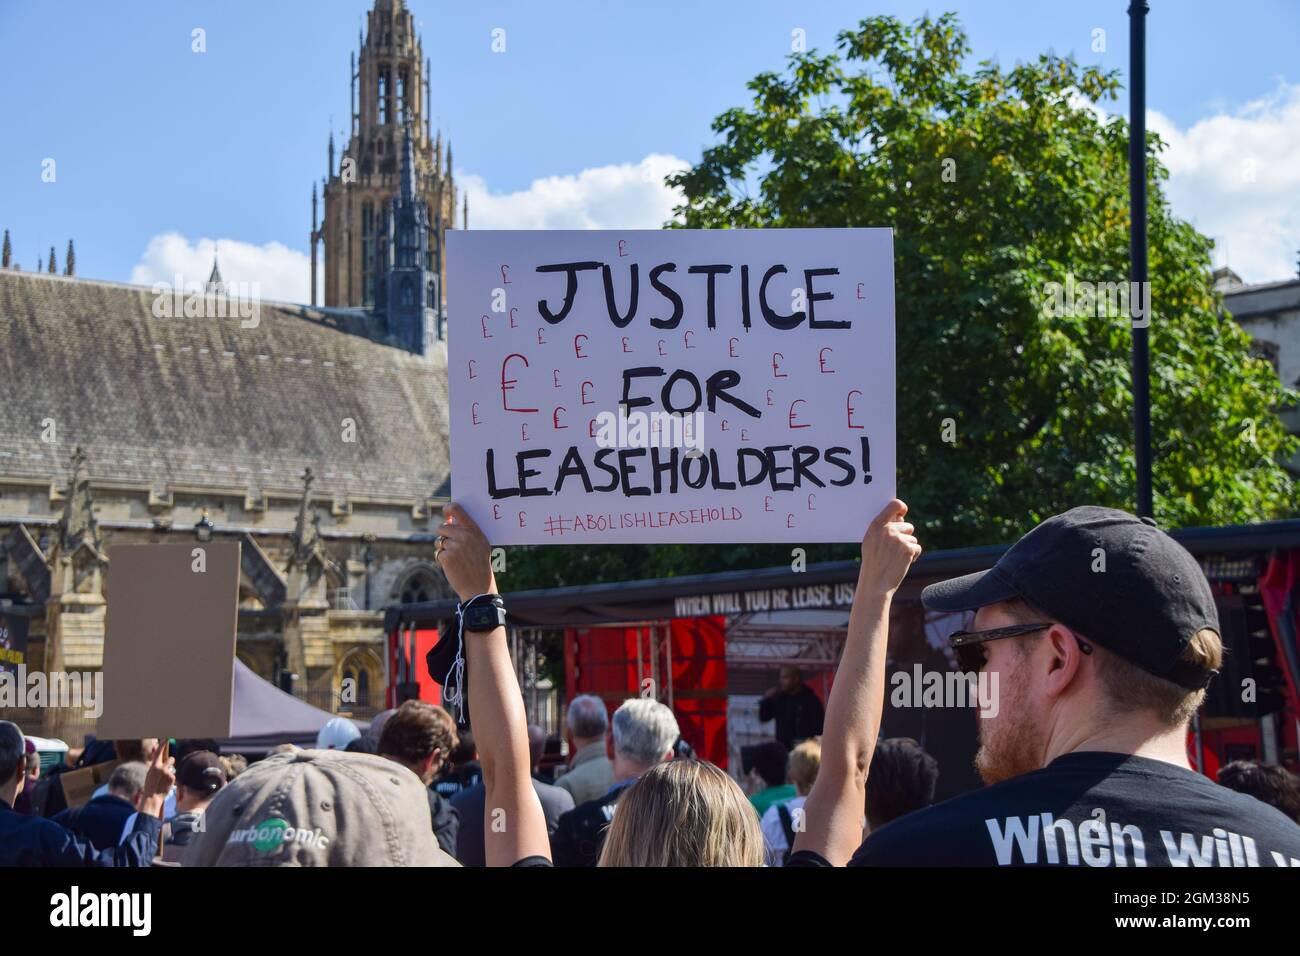 London, United Kingdom. 16th September 2021. Protesters gathered in Parliament Square to call on the government to address issues affecting leaseholders, including ending the cladding scandal and the outdated leasehold system. Credit: Vuk Valcic / Alamy Live News Stock Photo